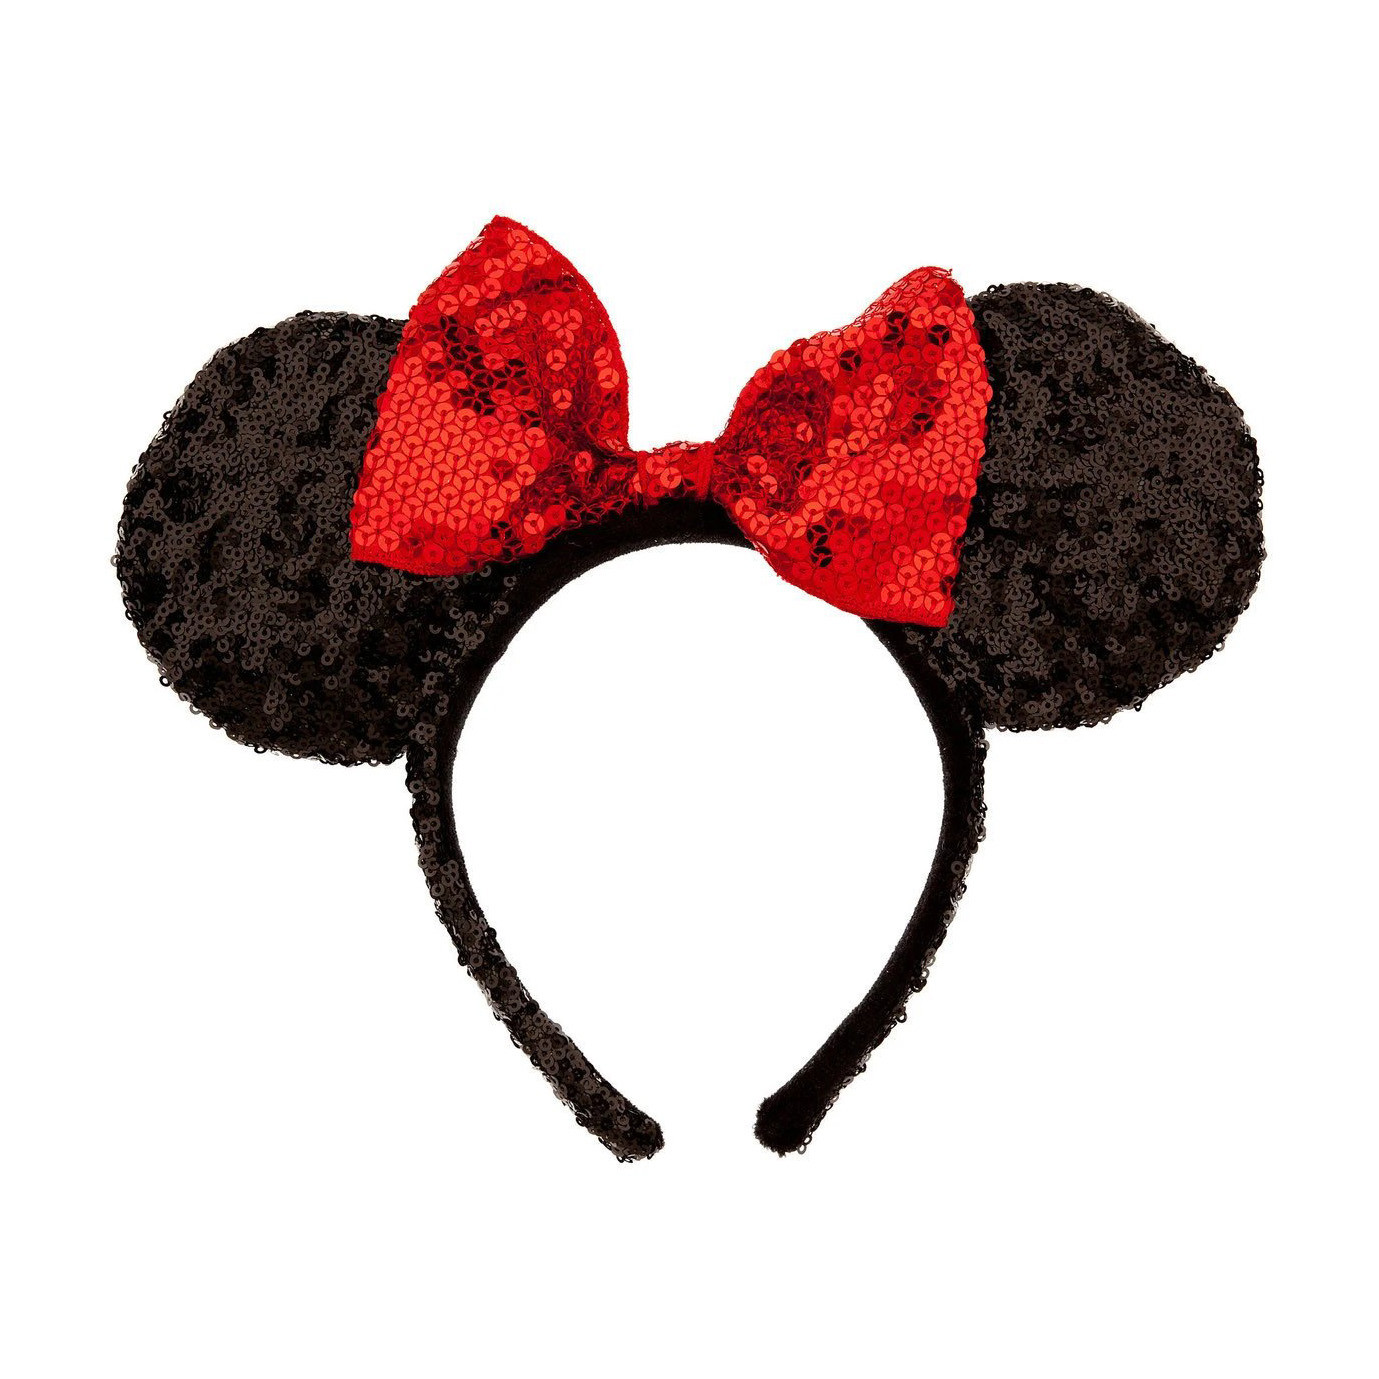 products Disney Parks - Minnie Mouse Ears Headband - Black Sequined Ears - Red Sequined Bow - Original Classic